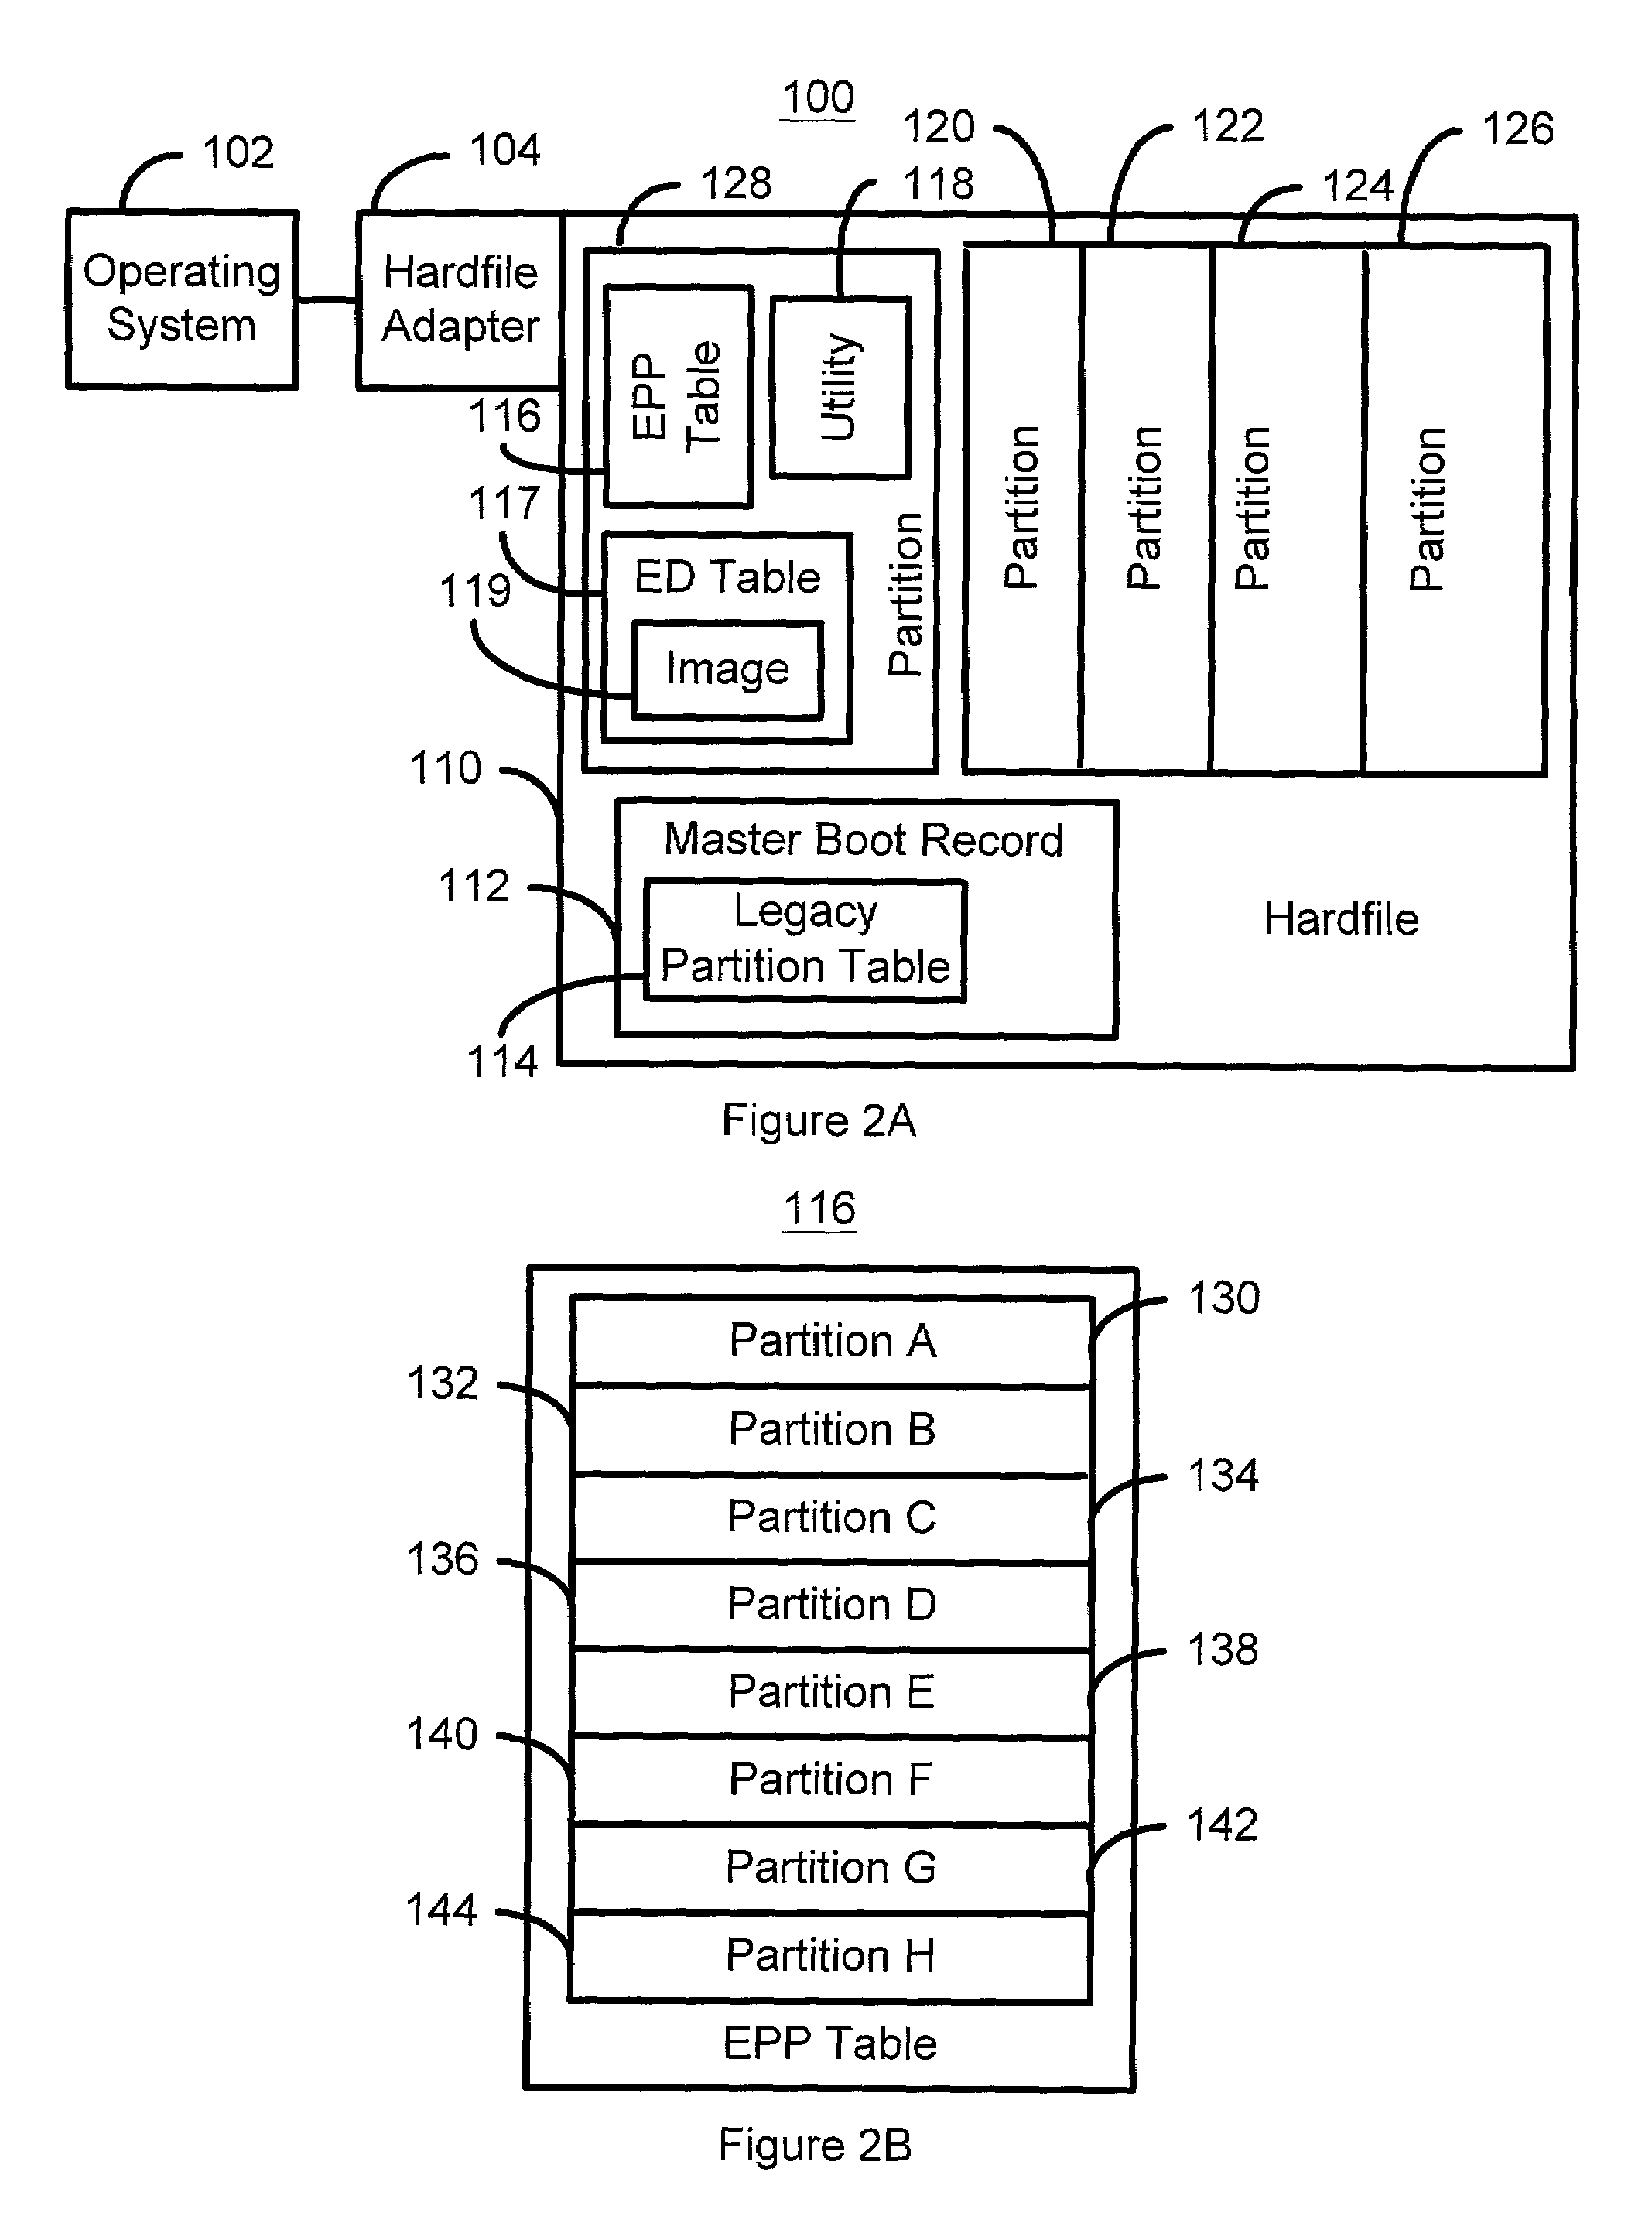 Method and system for providing an event driven image for a boot record